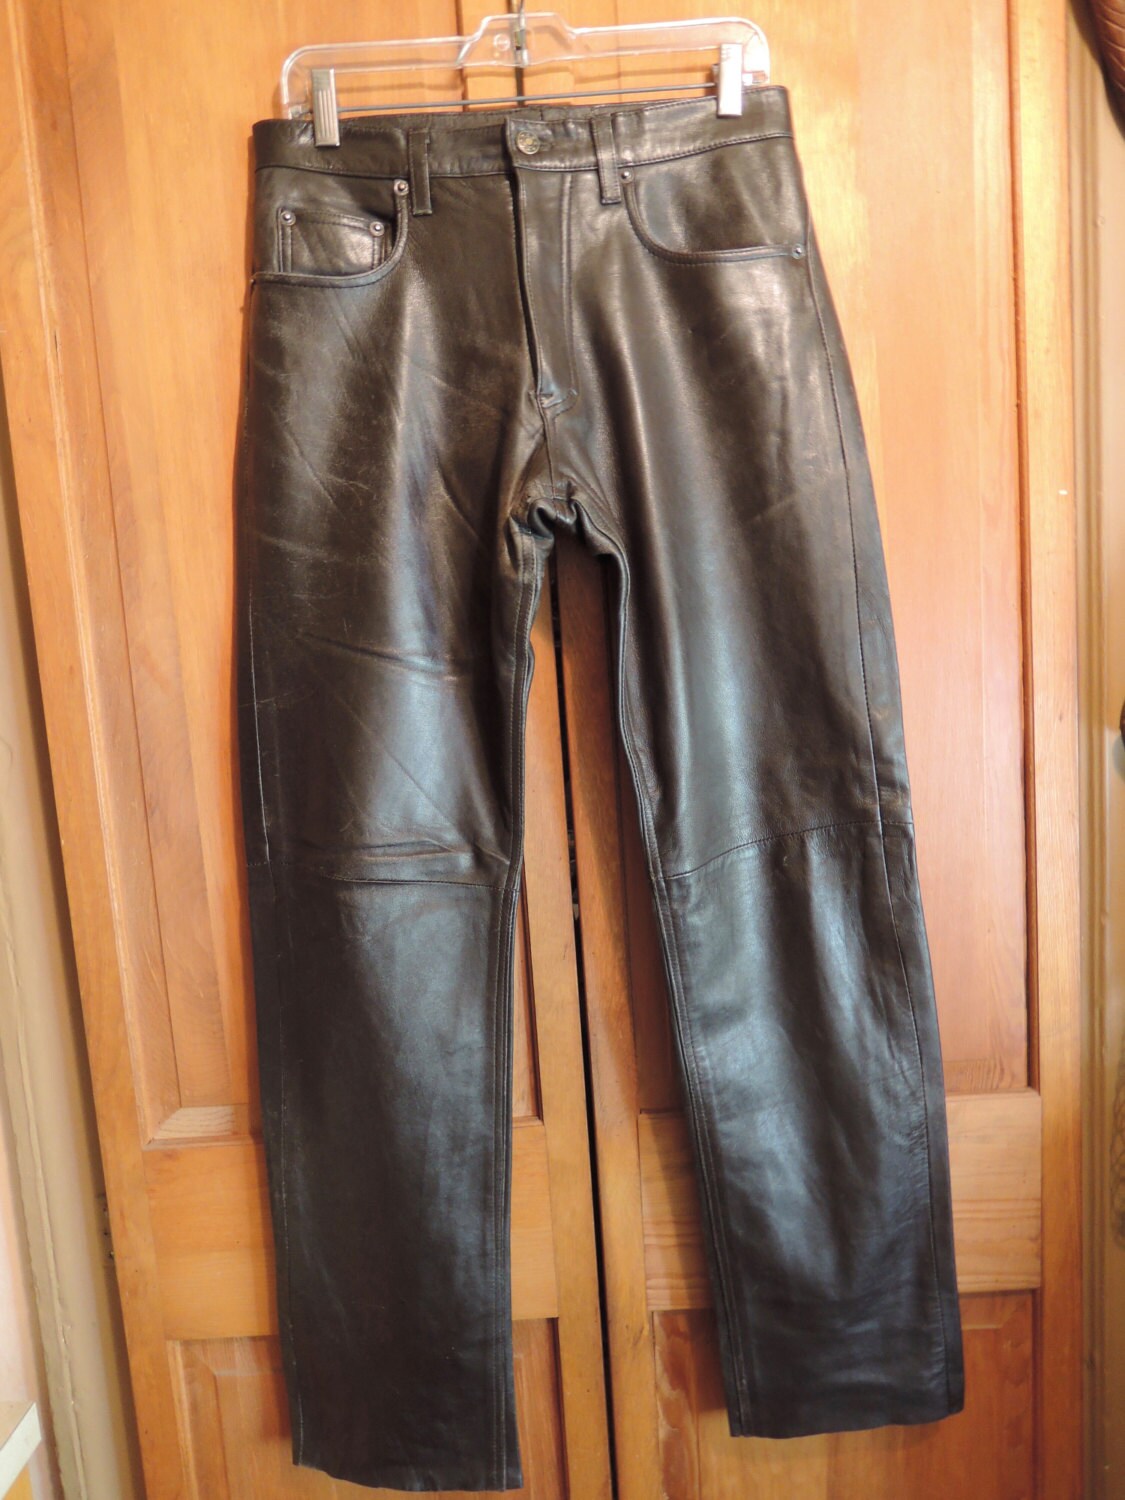 Chocolate Brown Leather Pants - Etsy